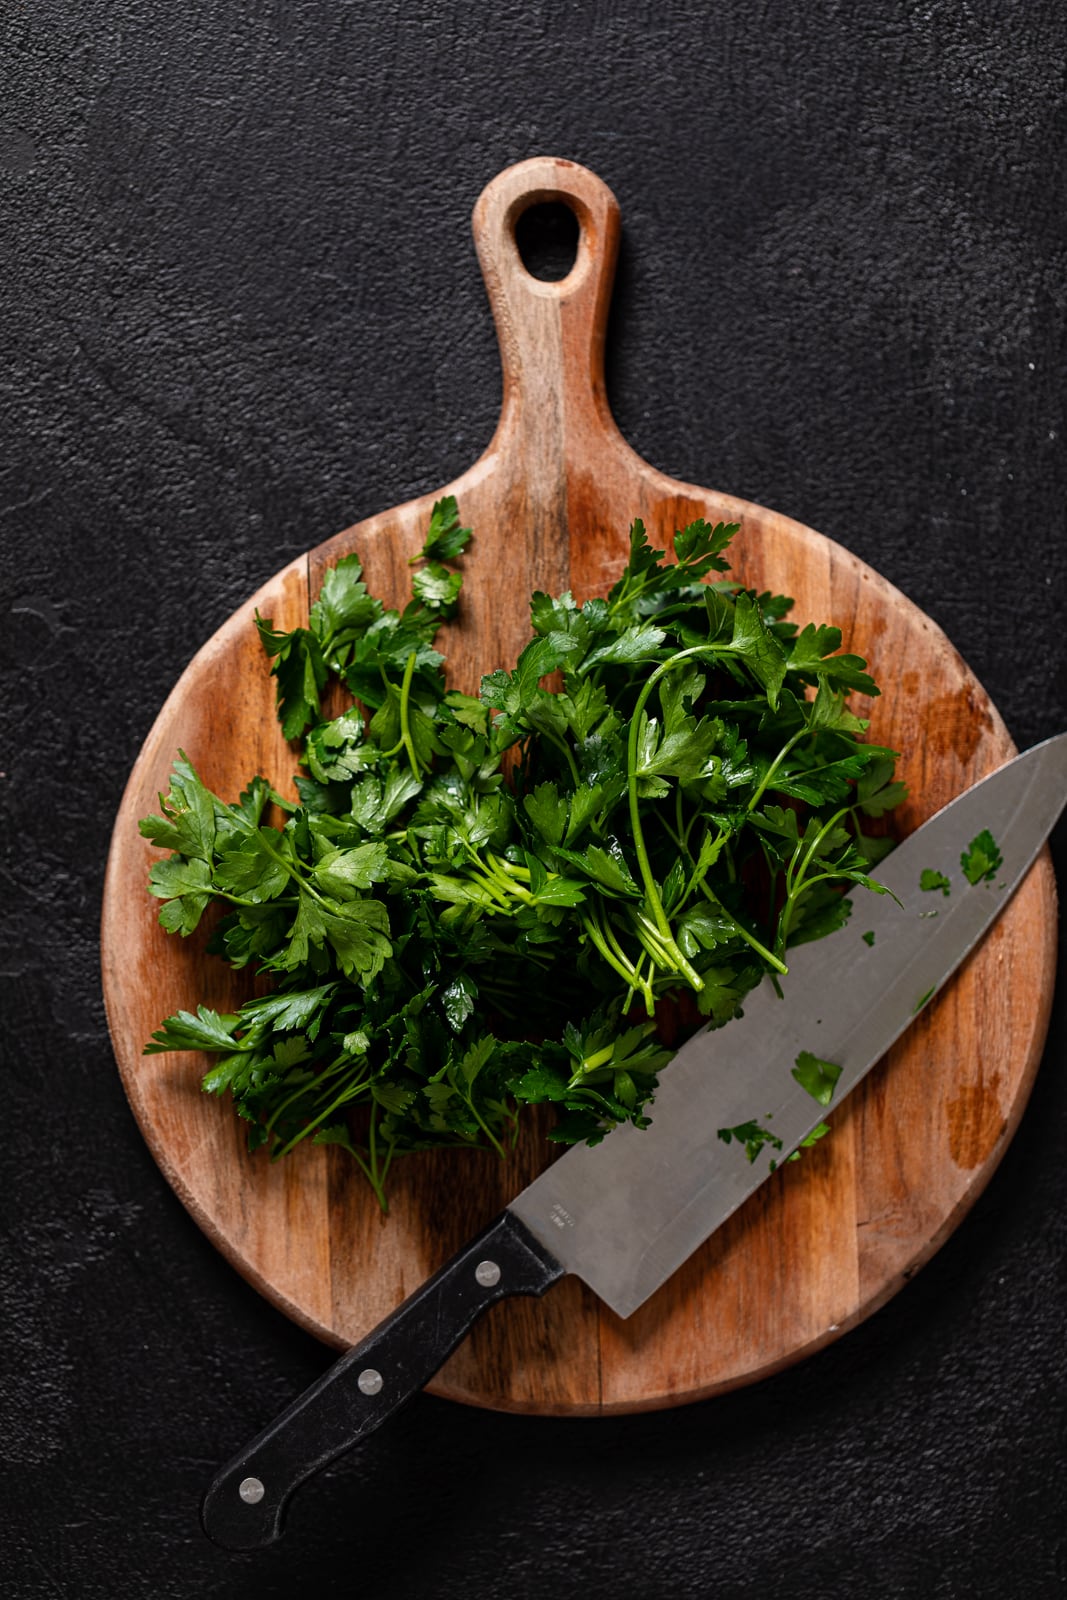 Cilantro and a knife on a wooden cutting board